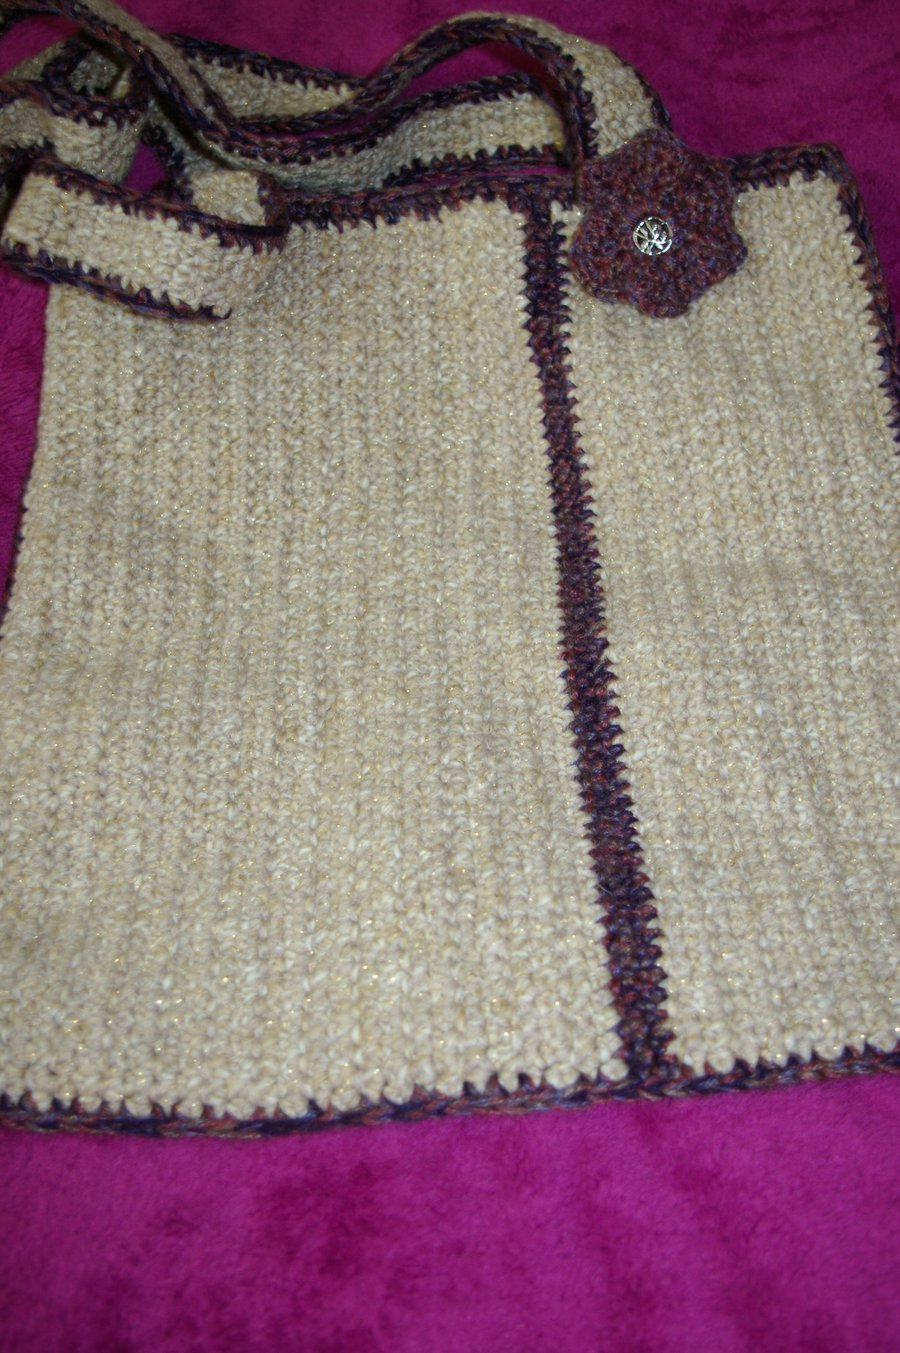 Bag crochet tote style crochet bag in Beige and gold fleck with purple